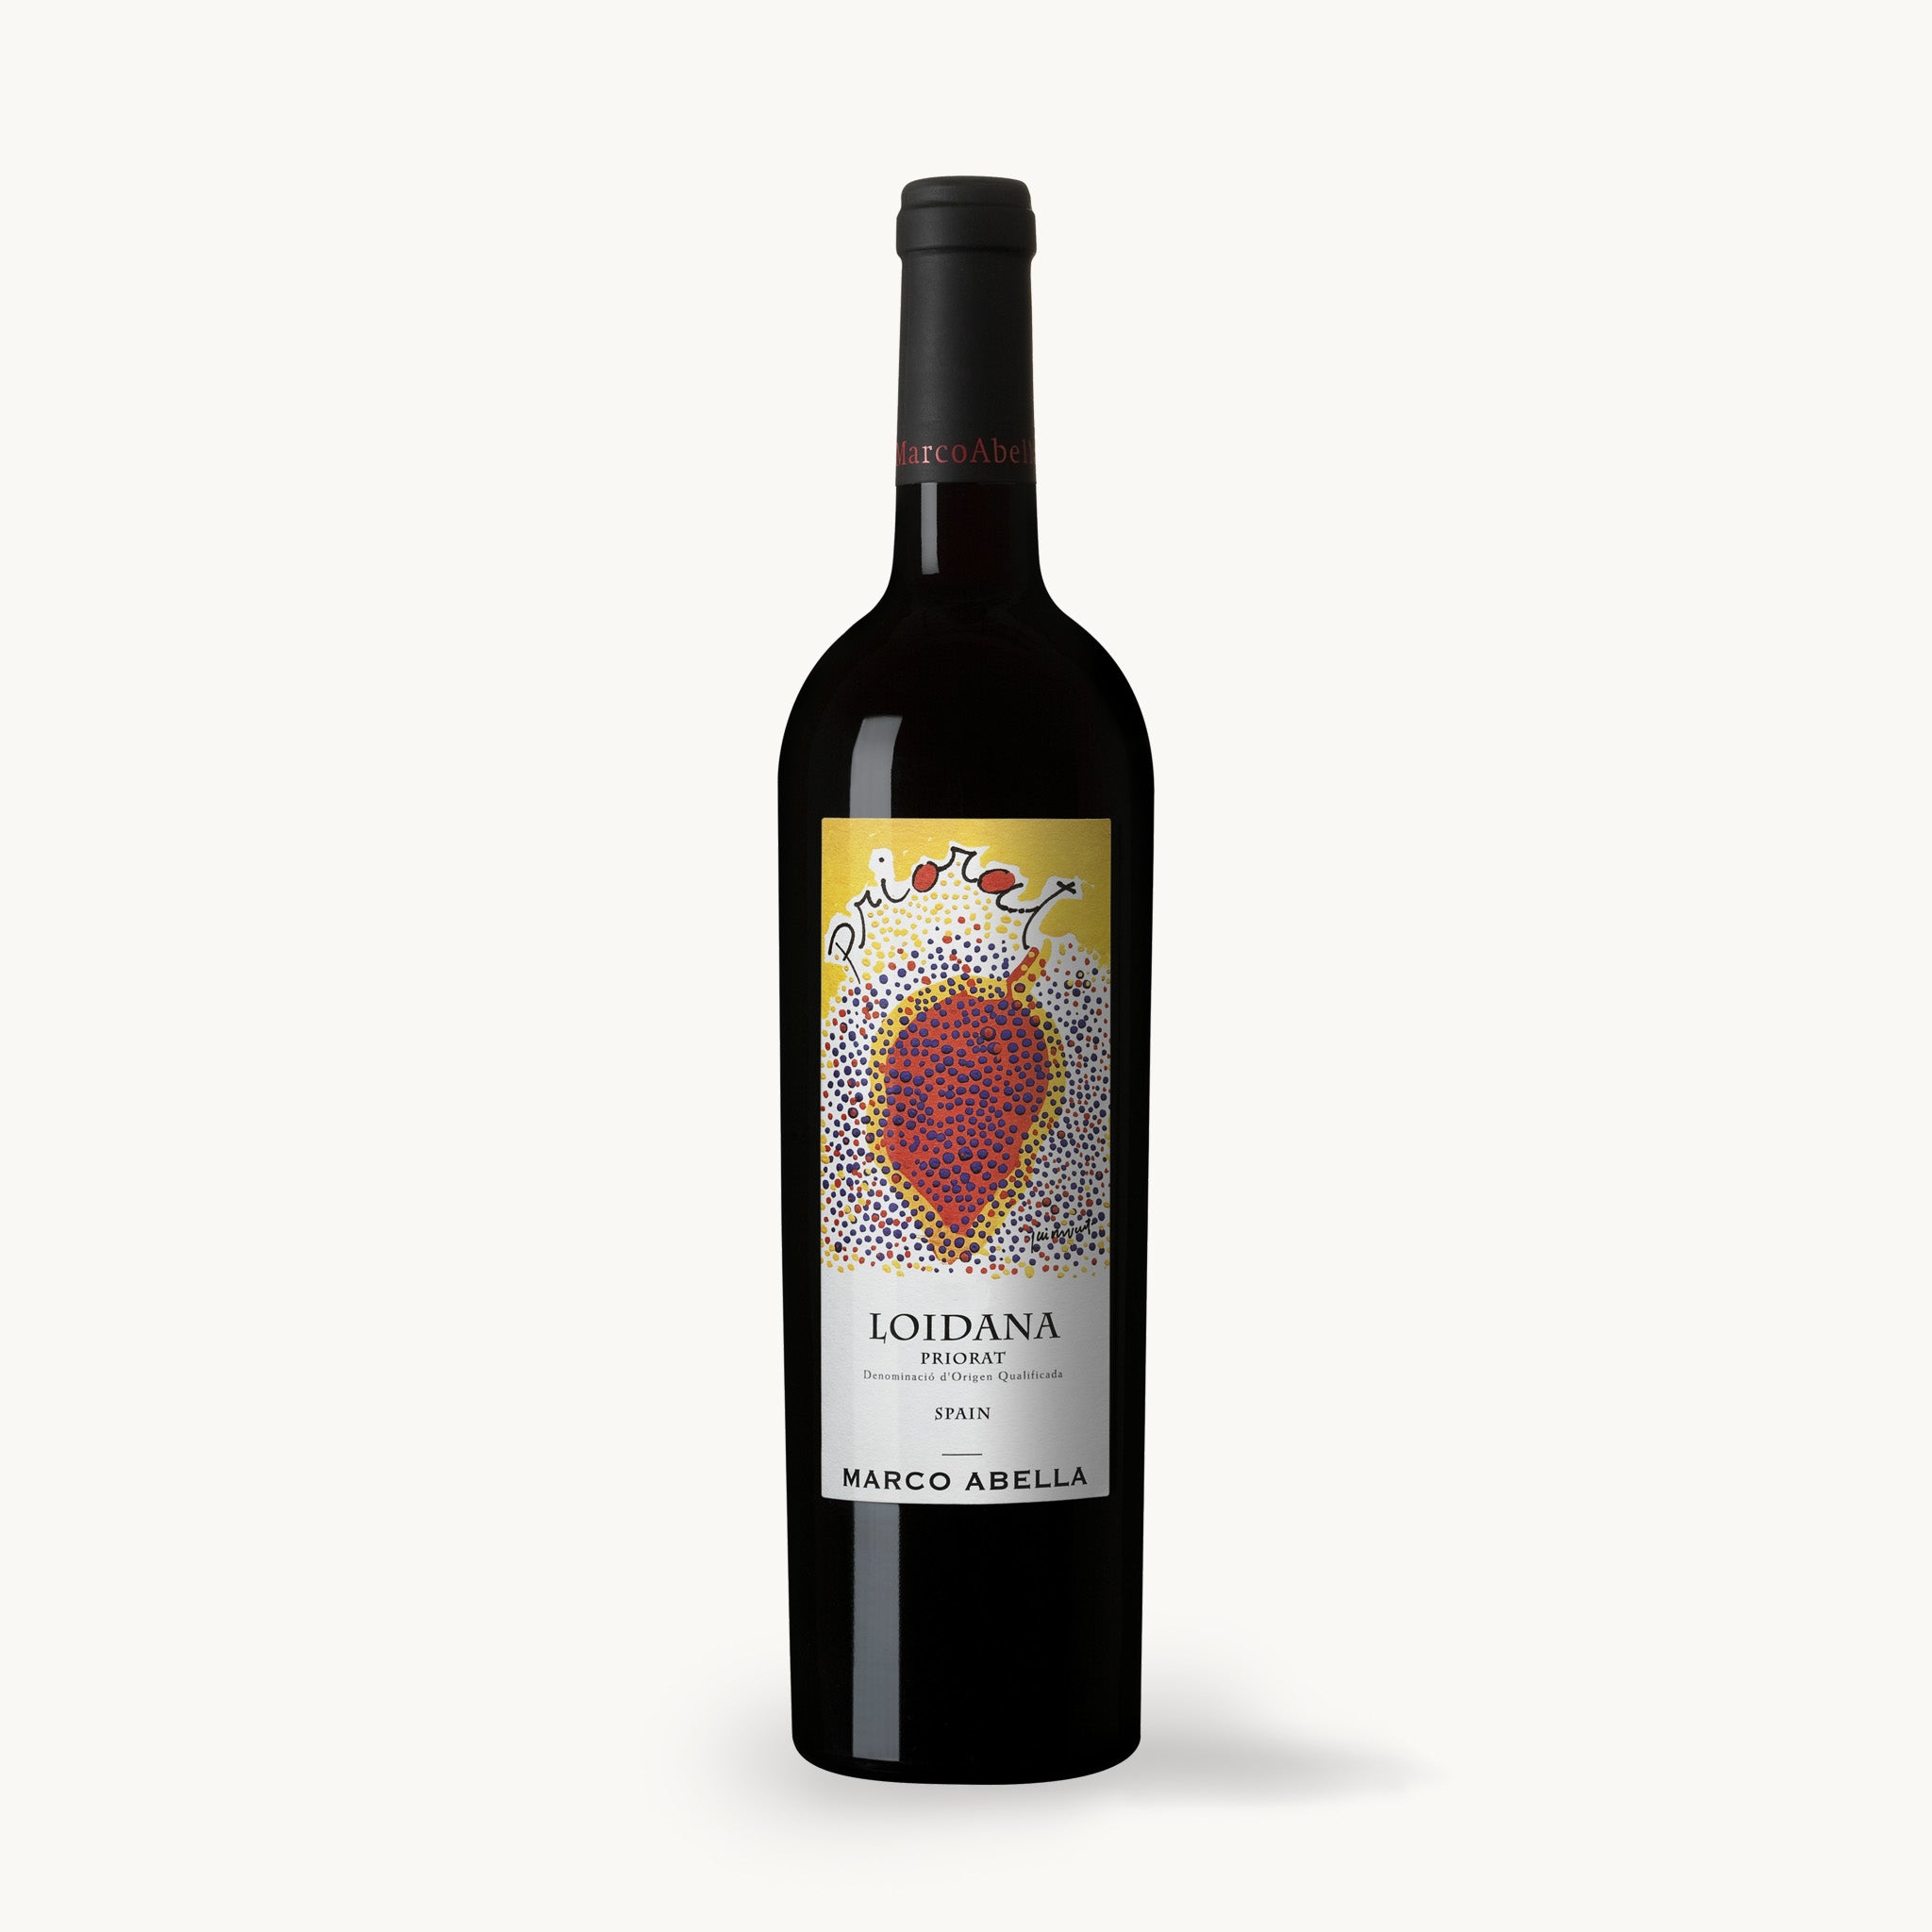 Loidana Priorat, Marco Abella, Red Wine from Spain